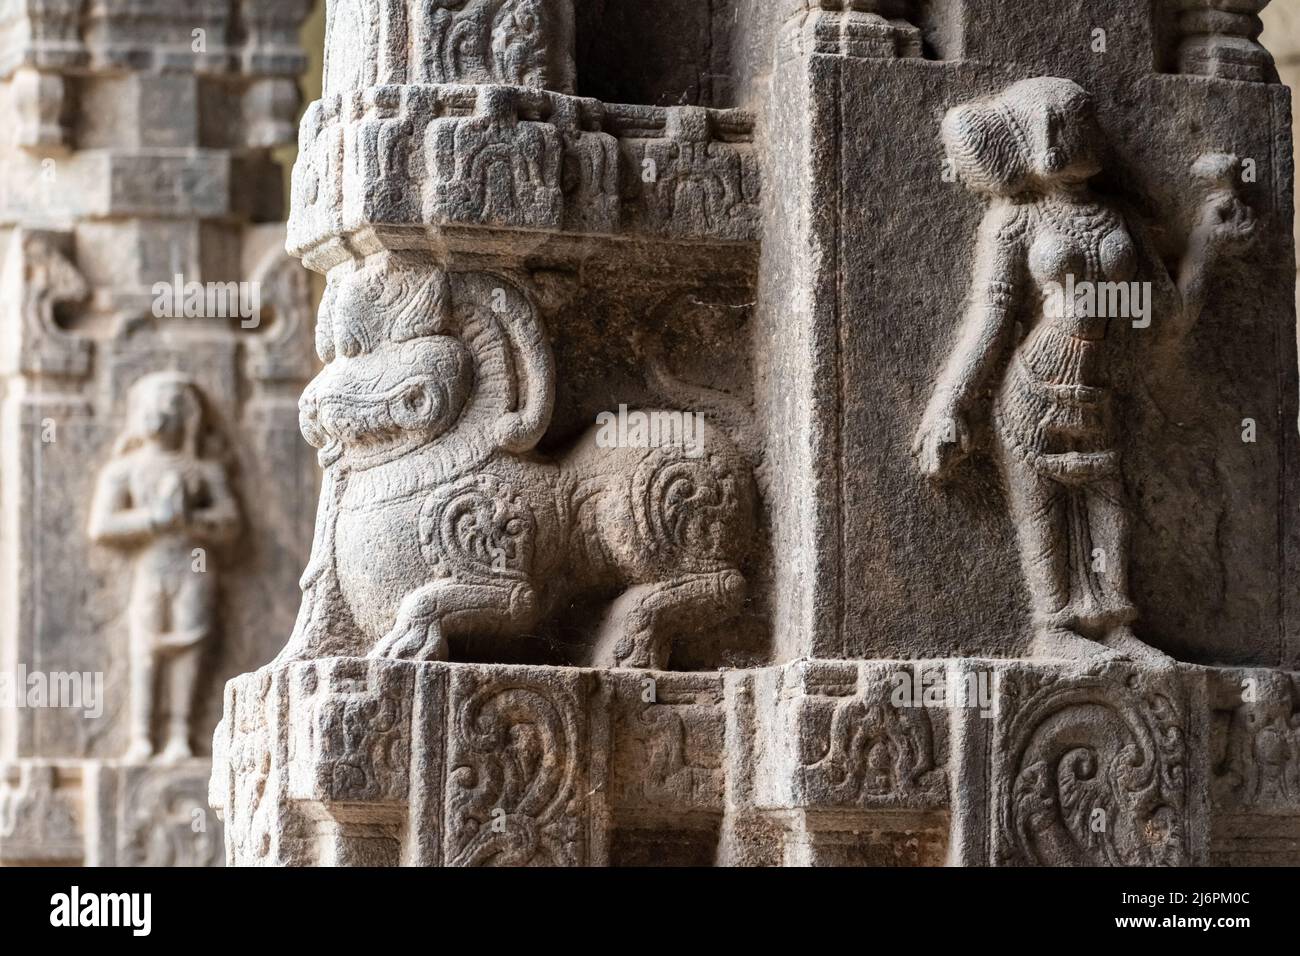 A beautiful stone carving of a figurine on the stone columns of the ancient Hindu temple of Jalakandeswarar in the Vellore Fort in Tamil Nadu. Stock Photo